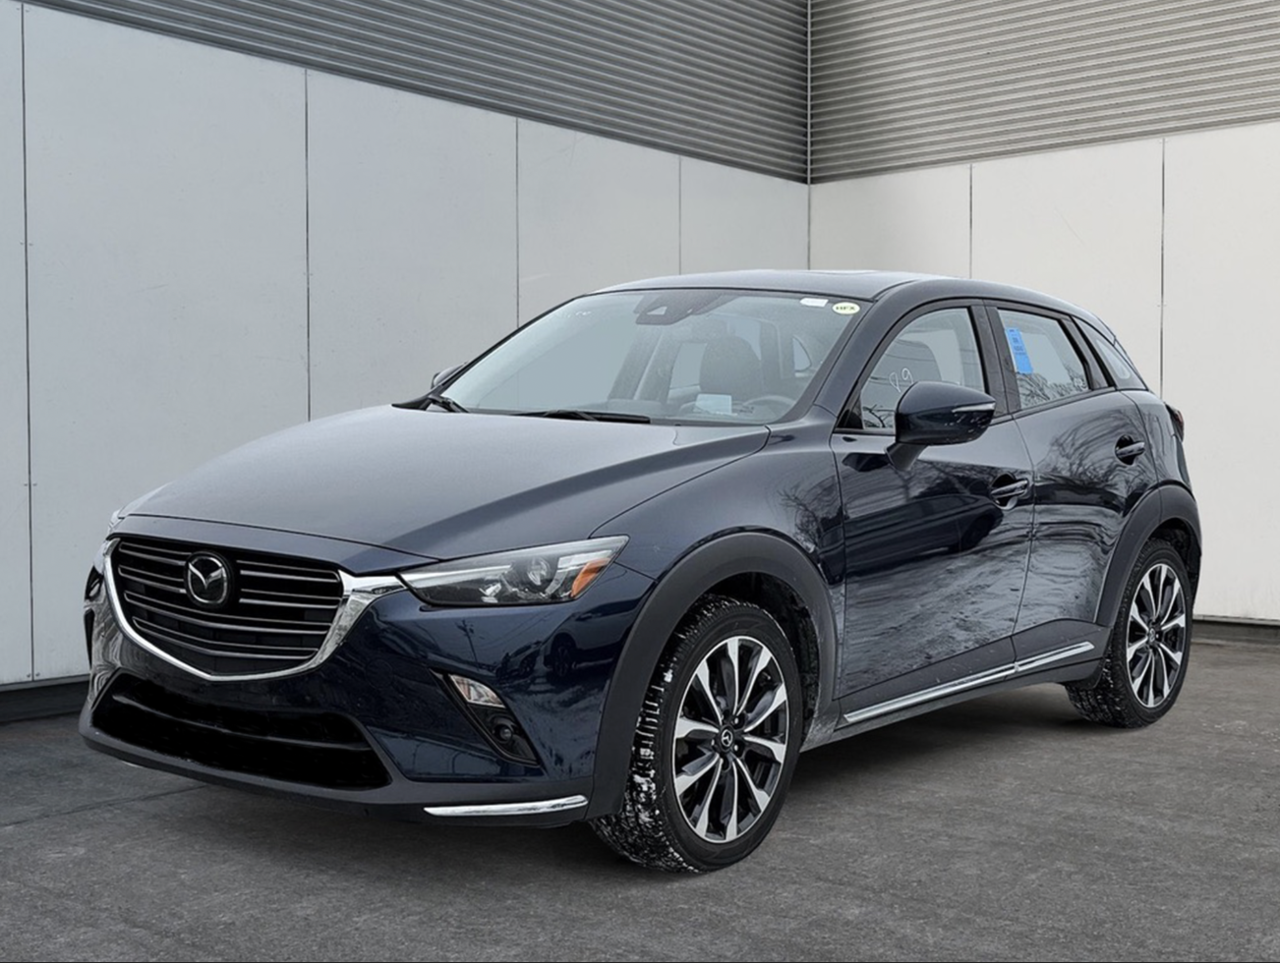 2020 Mazda CX-3 GT The best place to buy a used car. Period.